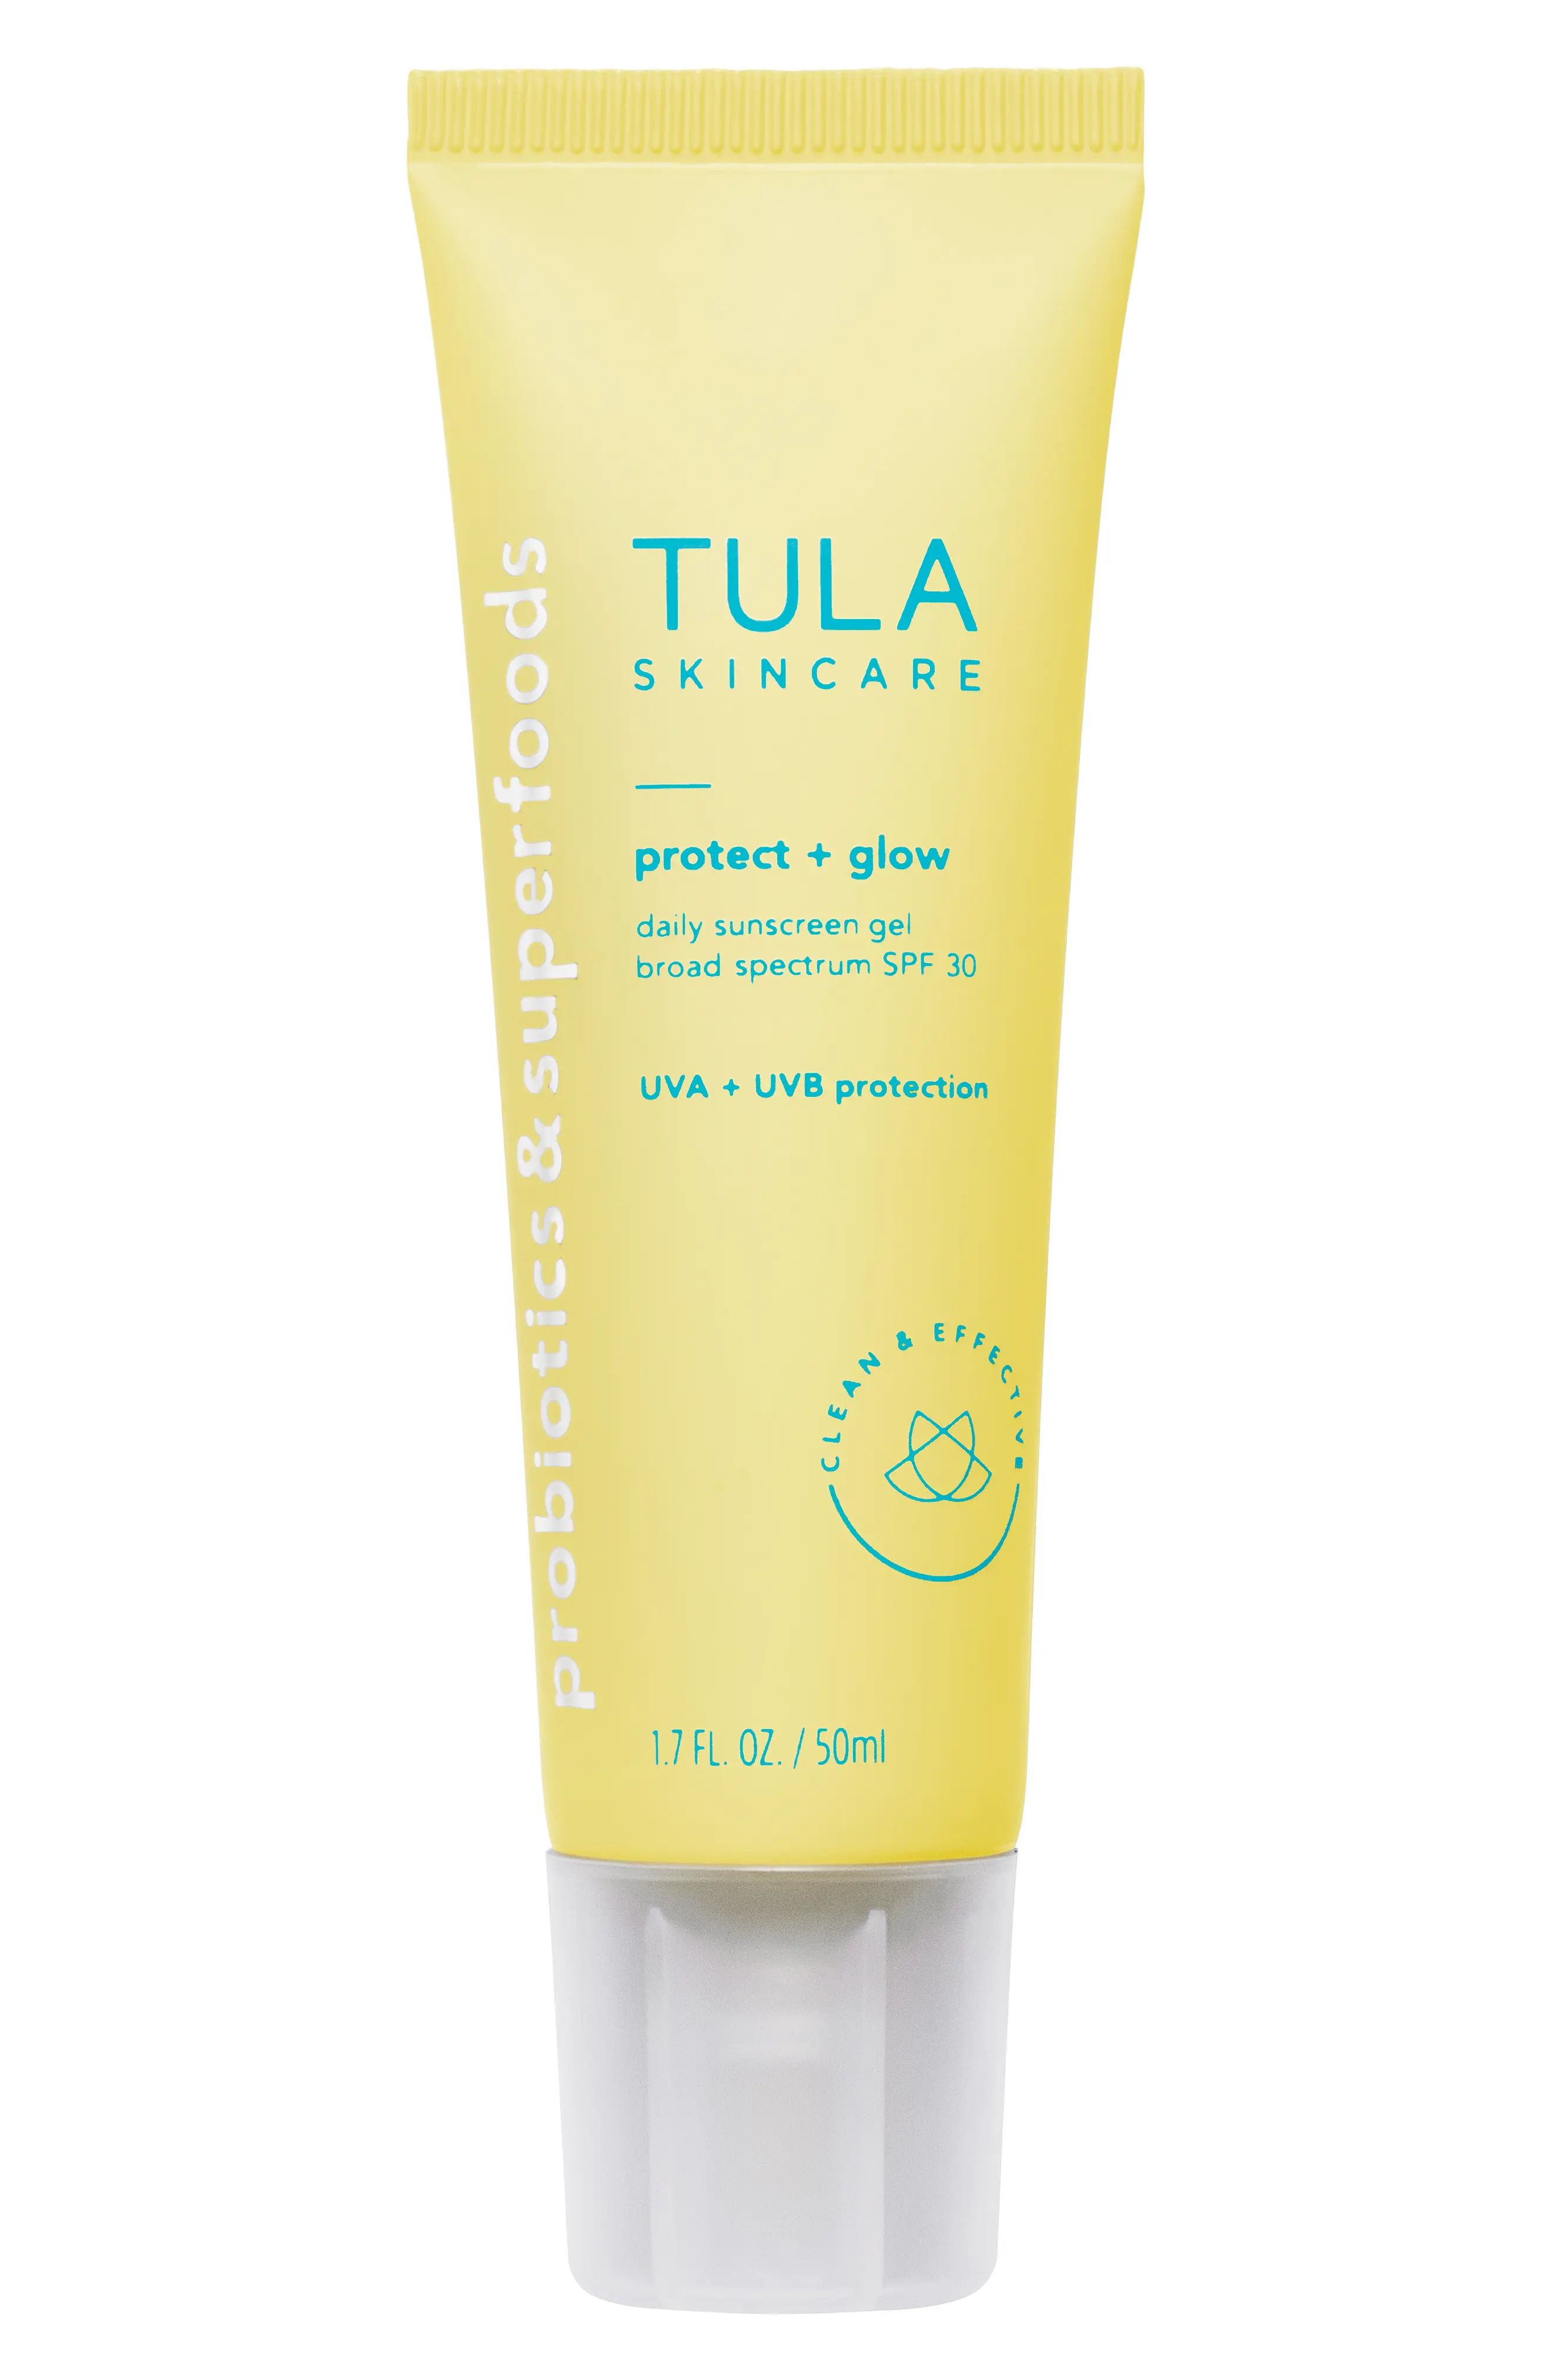 Tula Skincare Protect + Glow Daily Sunscreen Gel Broad Spectrum Spf 30 | Nordstrom